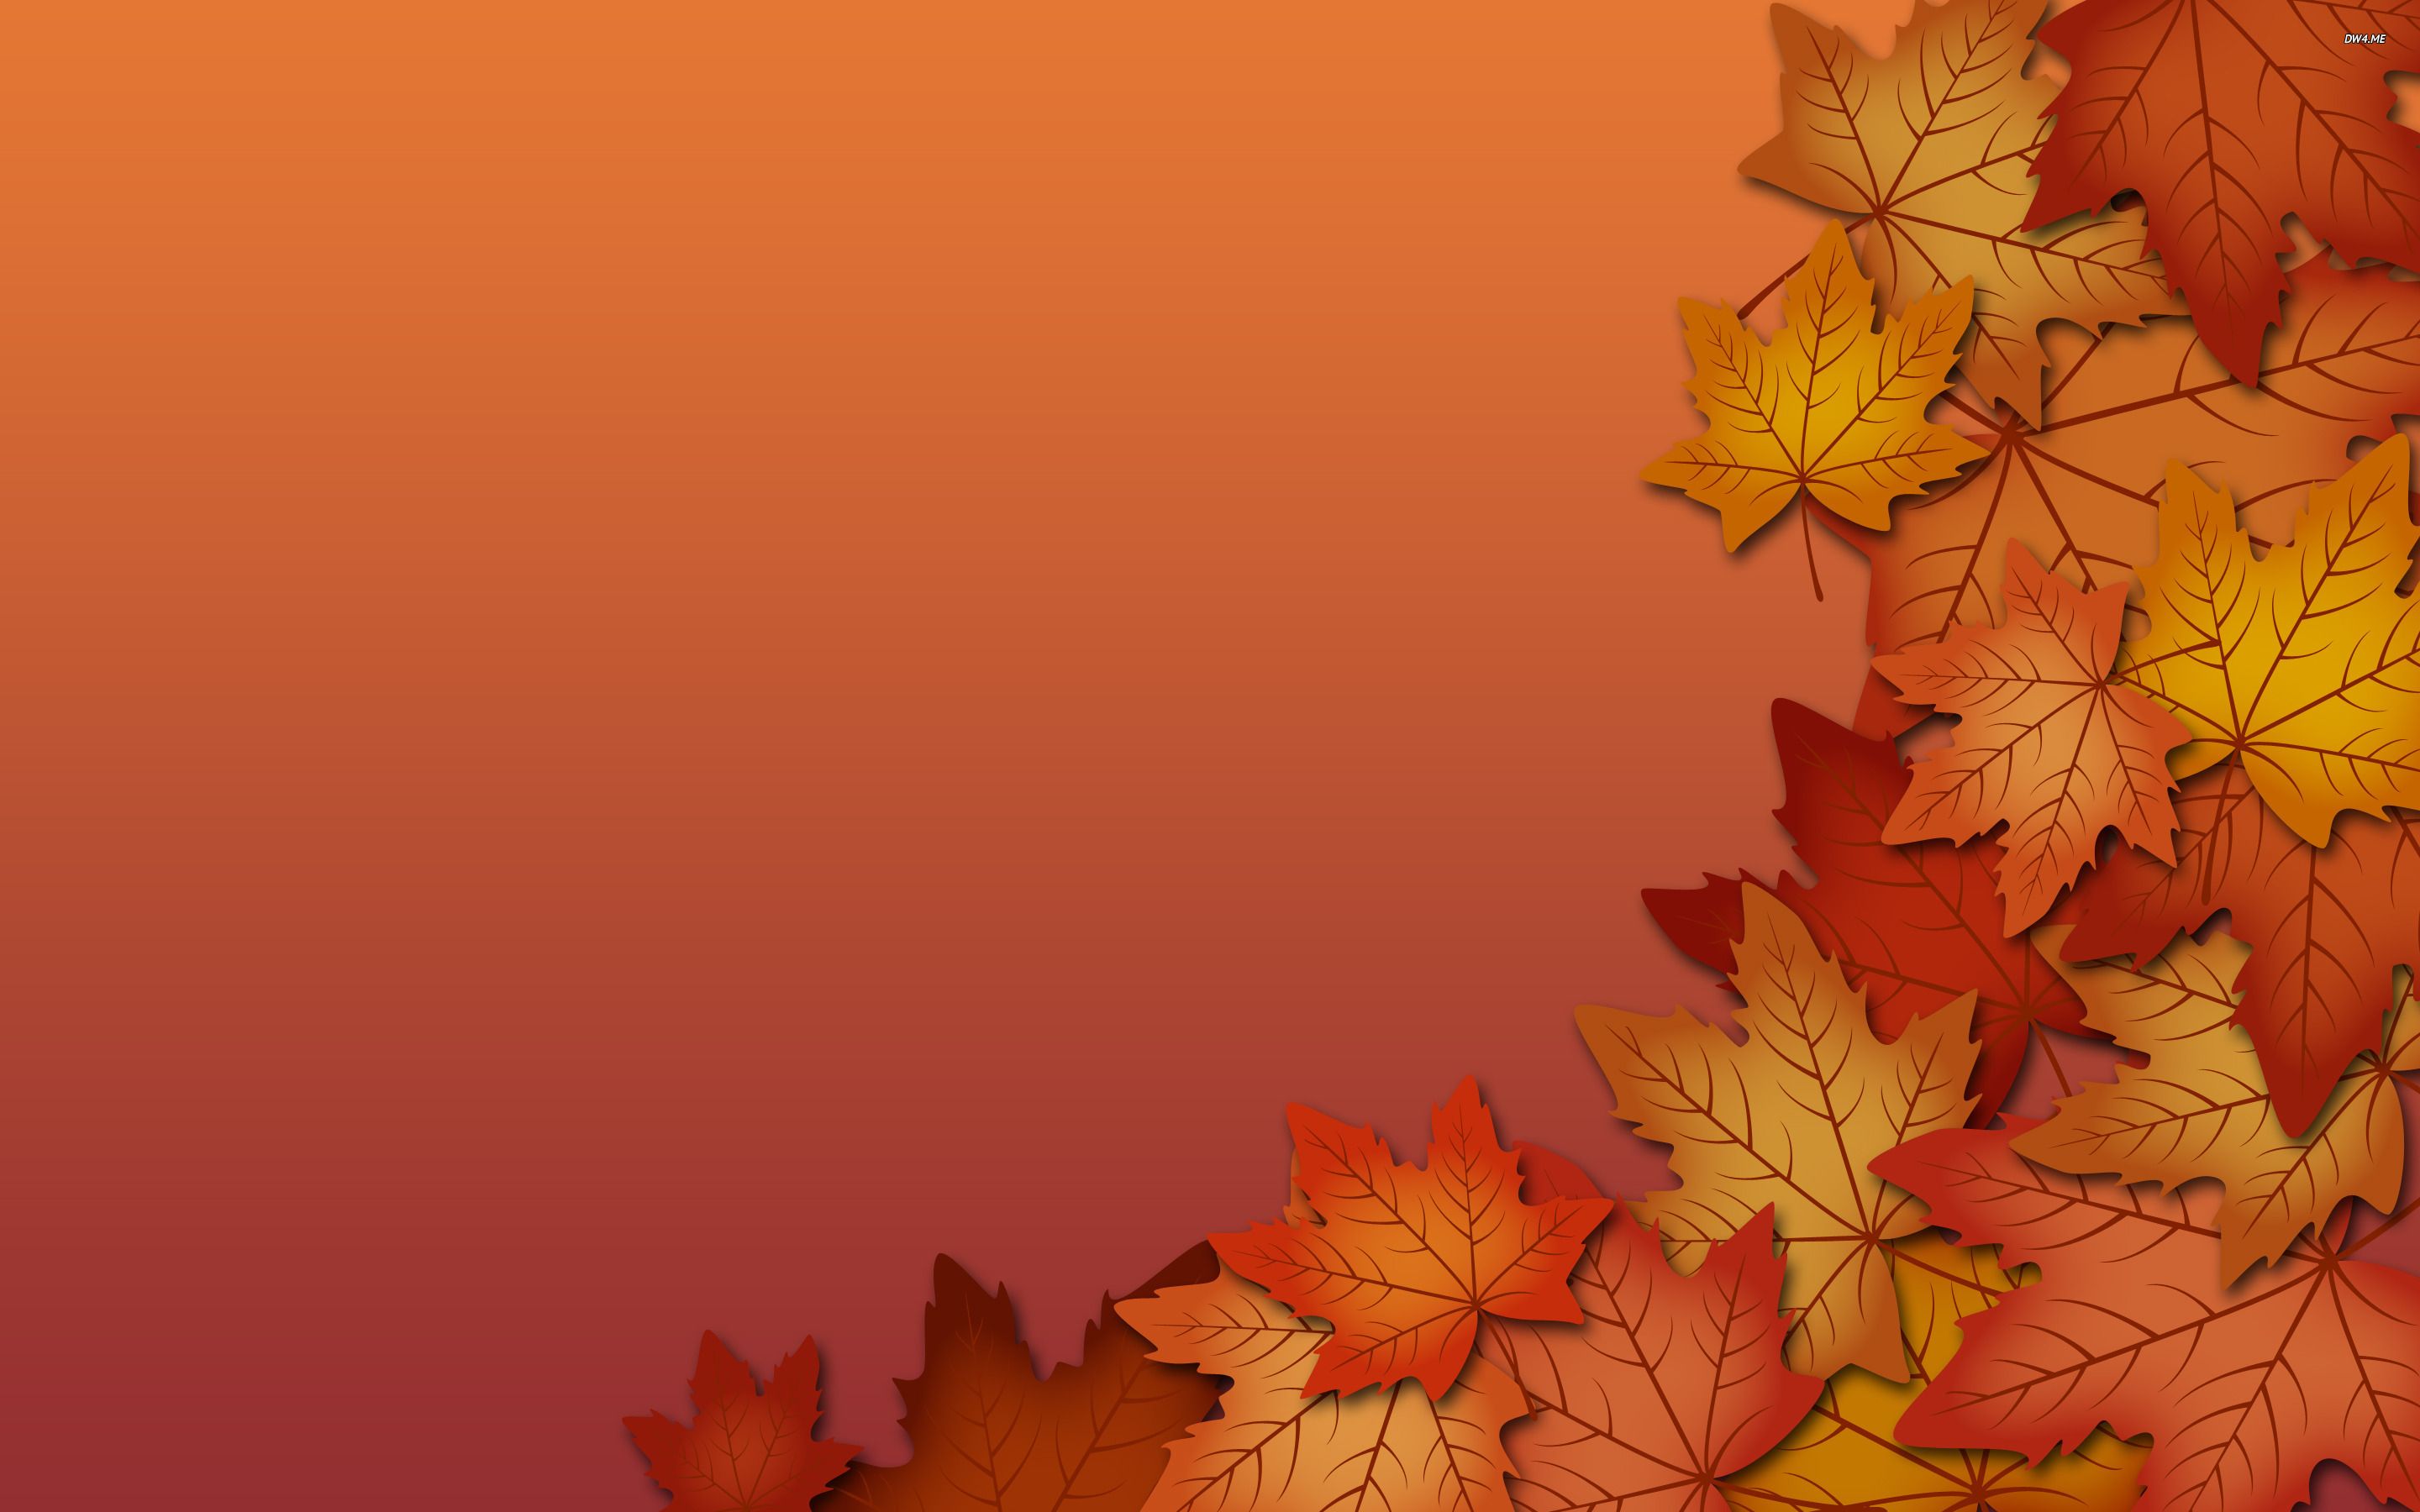 First Day of Autumn Wallpaper. First Snow Wallpaper, First Flight Wallpaper and First Love Wallpaper